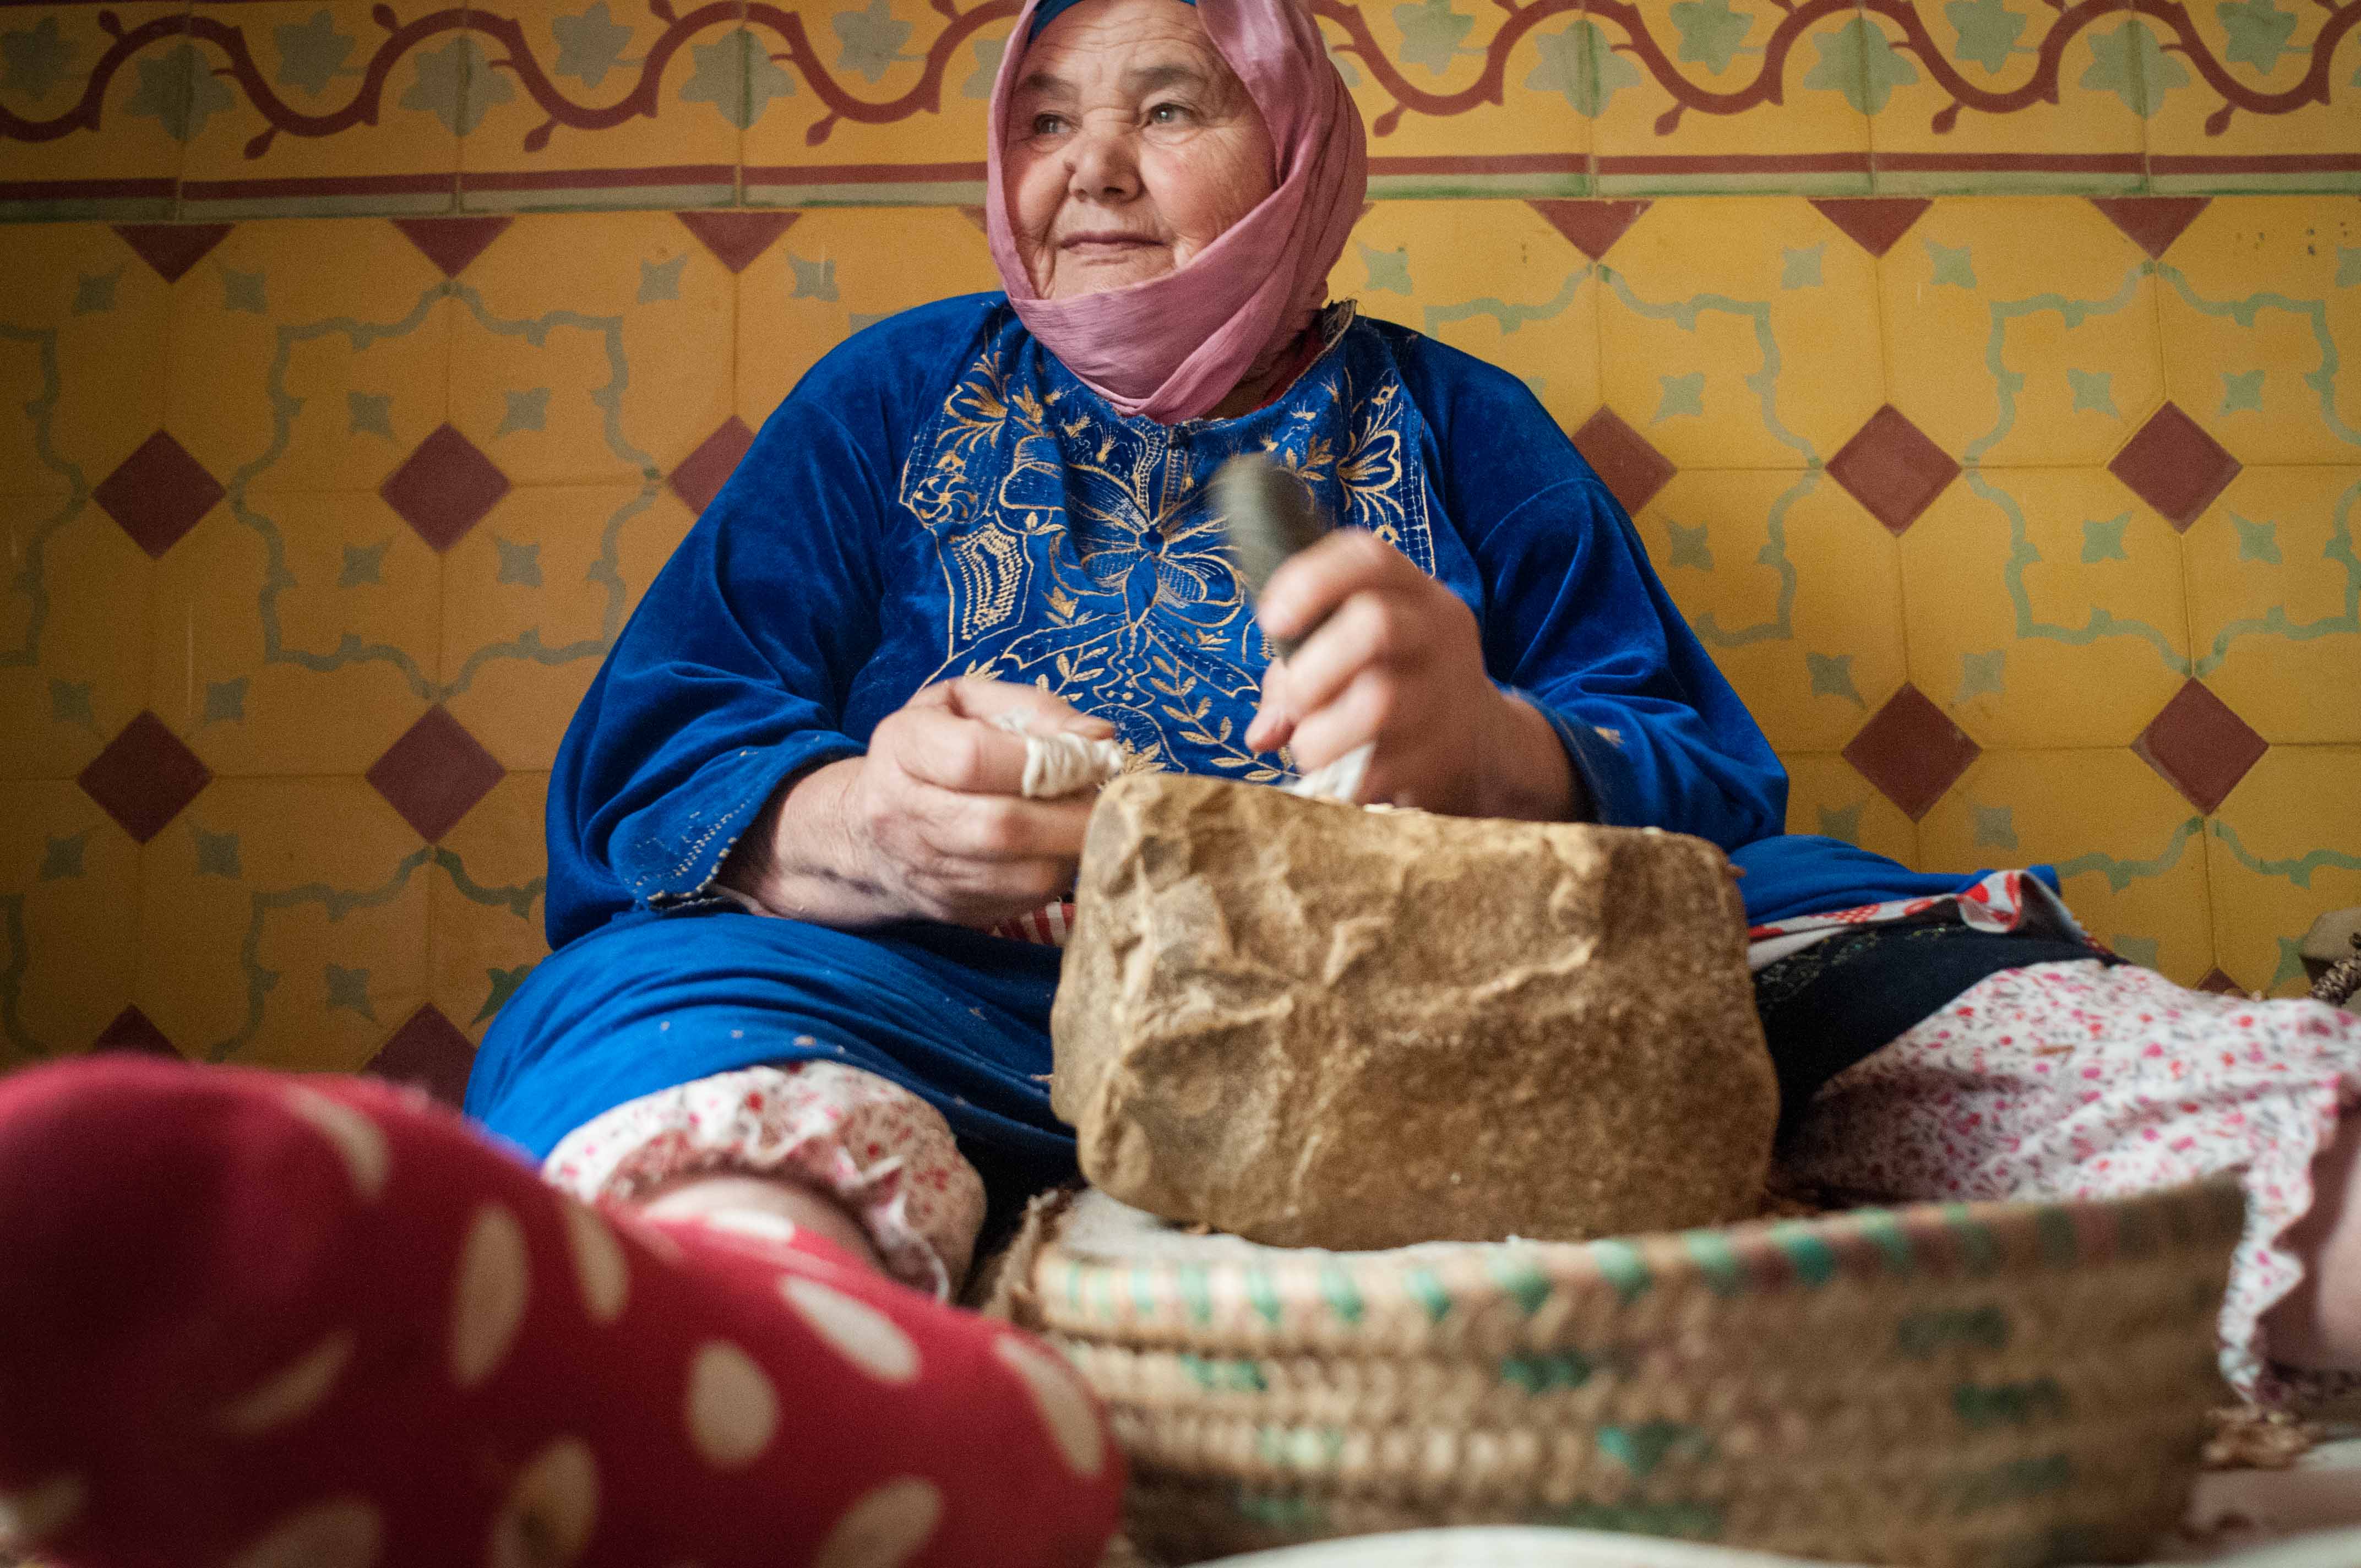 There are 32 women working in the cooperative in Imi N'Tlit. They spend 8 hrs a day crashing argan nuts in order to extract the so preciuos oil.